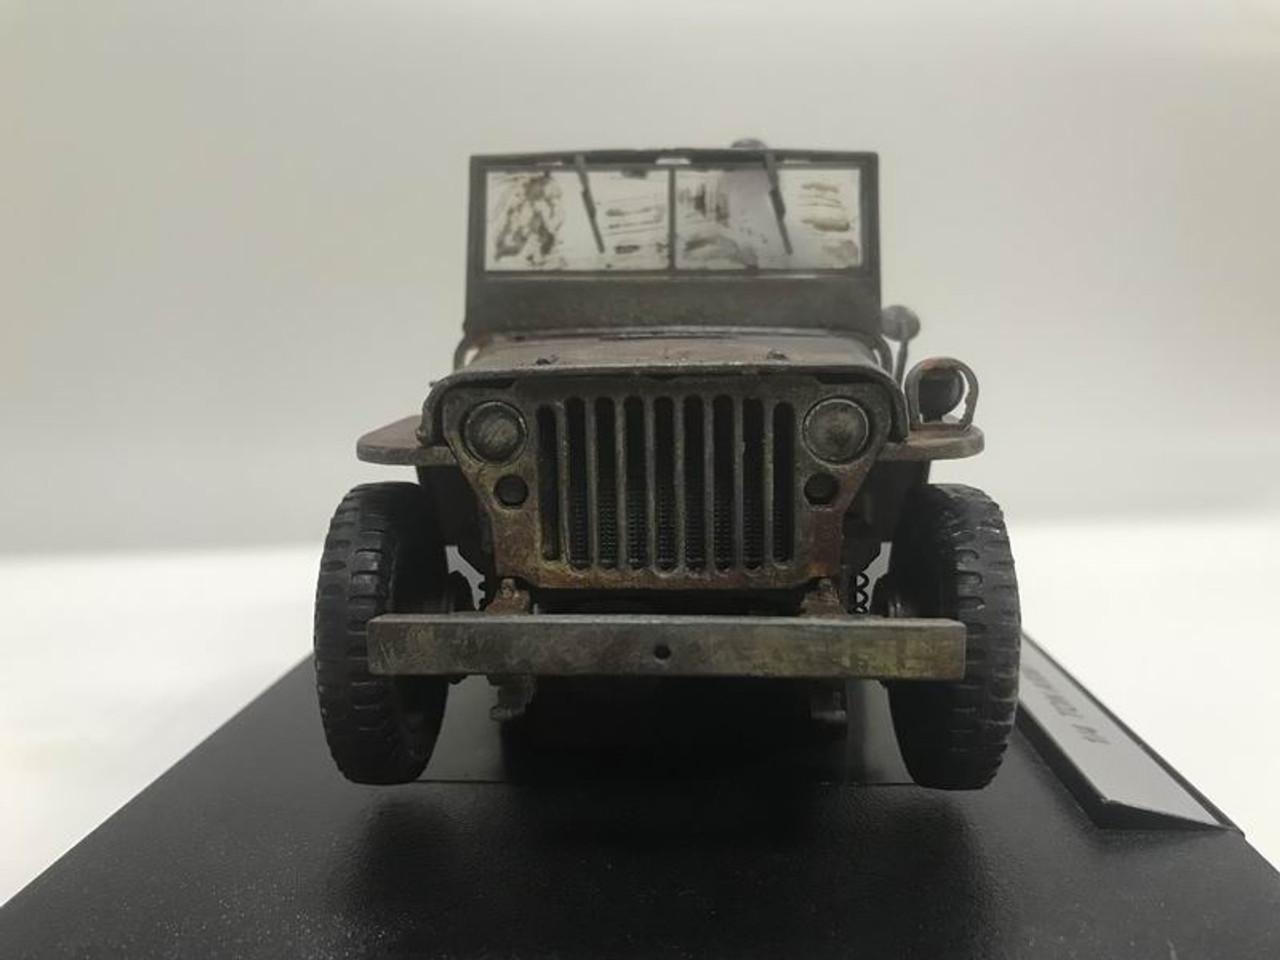 RARE 1/1 Prototype 1/18 Welly FX Classic Jeep Willys M151 WW2 Quarter 1/4 Ton Army Truck (Green Dirt Version) Diecast Car Model